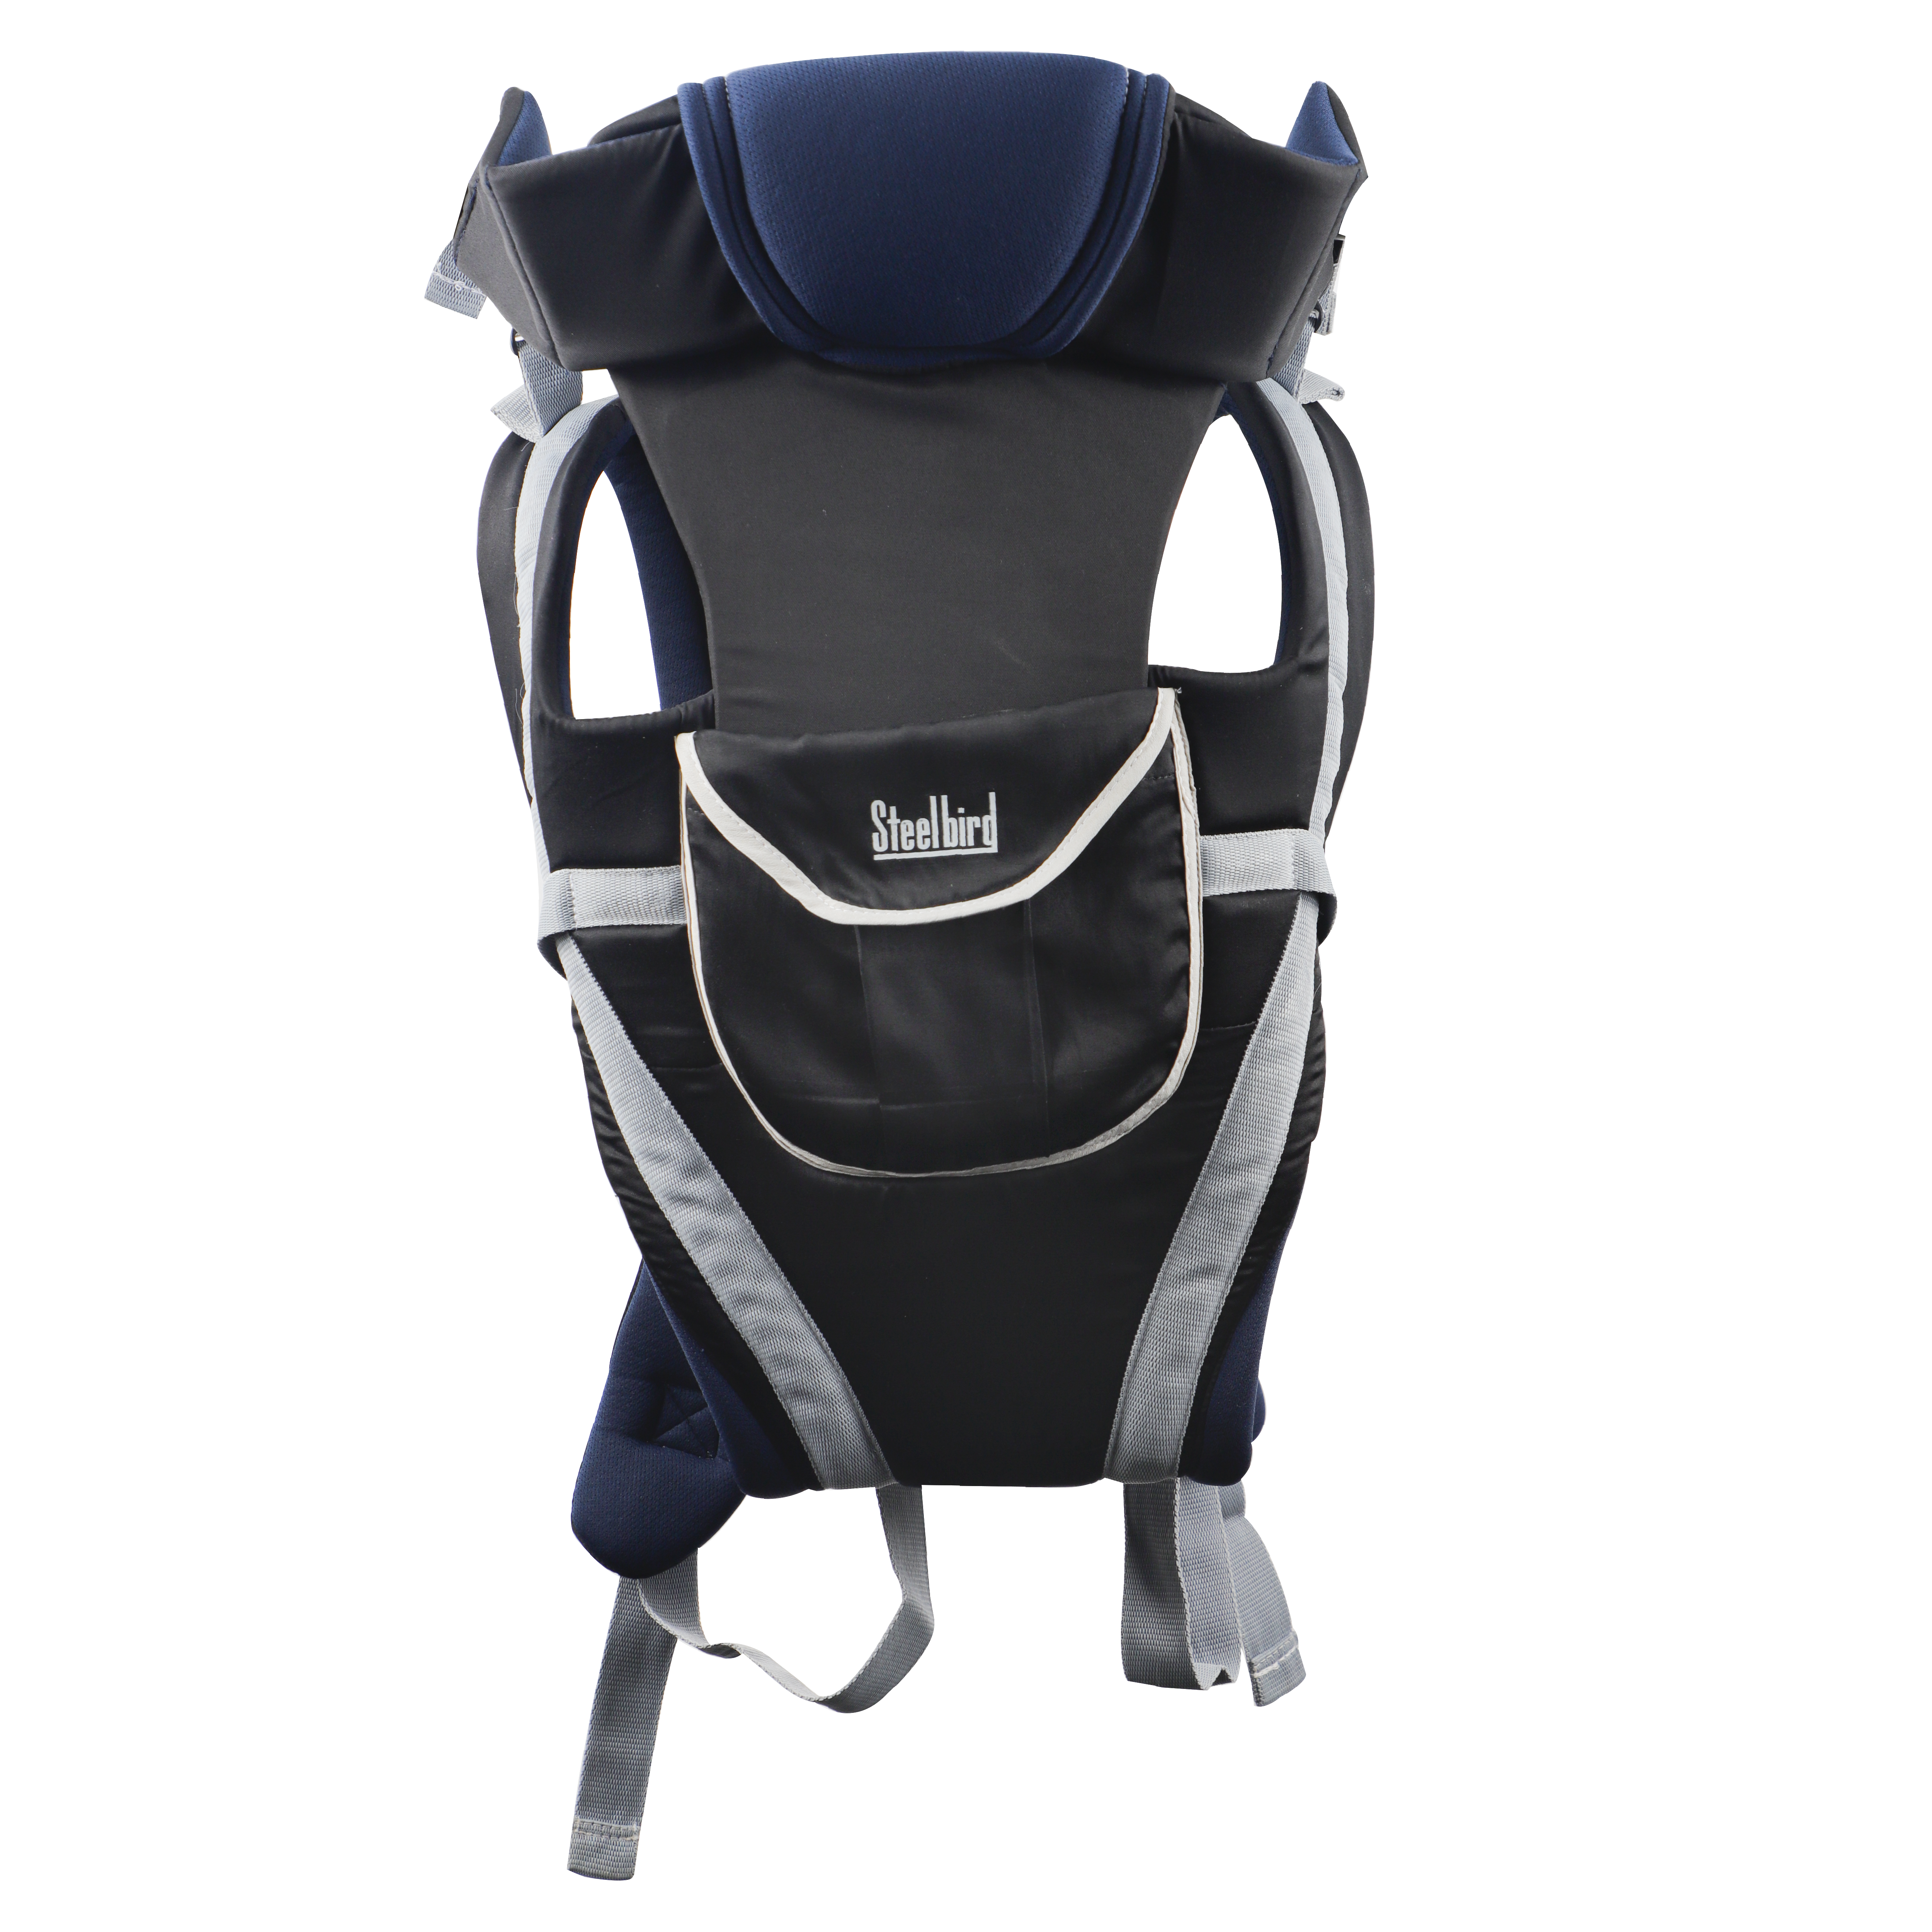 Steelbird Premium Kids 4-in-1 Adjustable Baby Carrier Cum Kangaroo Bag With Lumbar Support-Lightweight And Breathable-Back-Front Carrier For Baby With Safety Belt-Max Weight Up To 15 Kg (Blue Black)